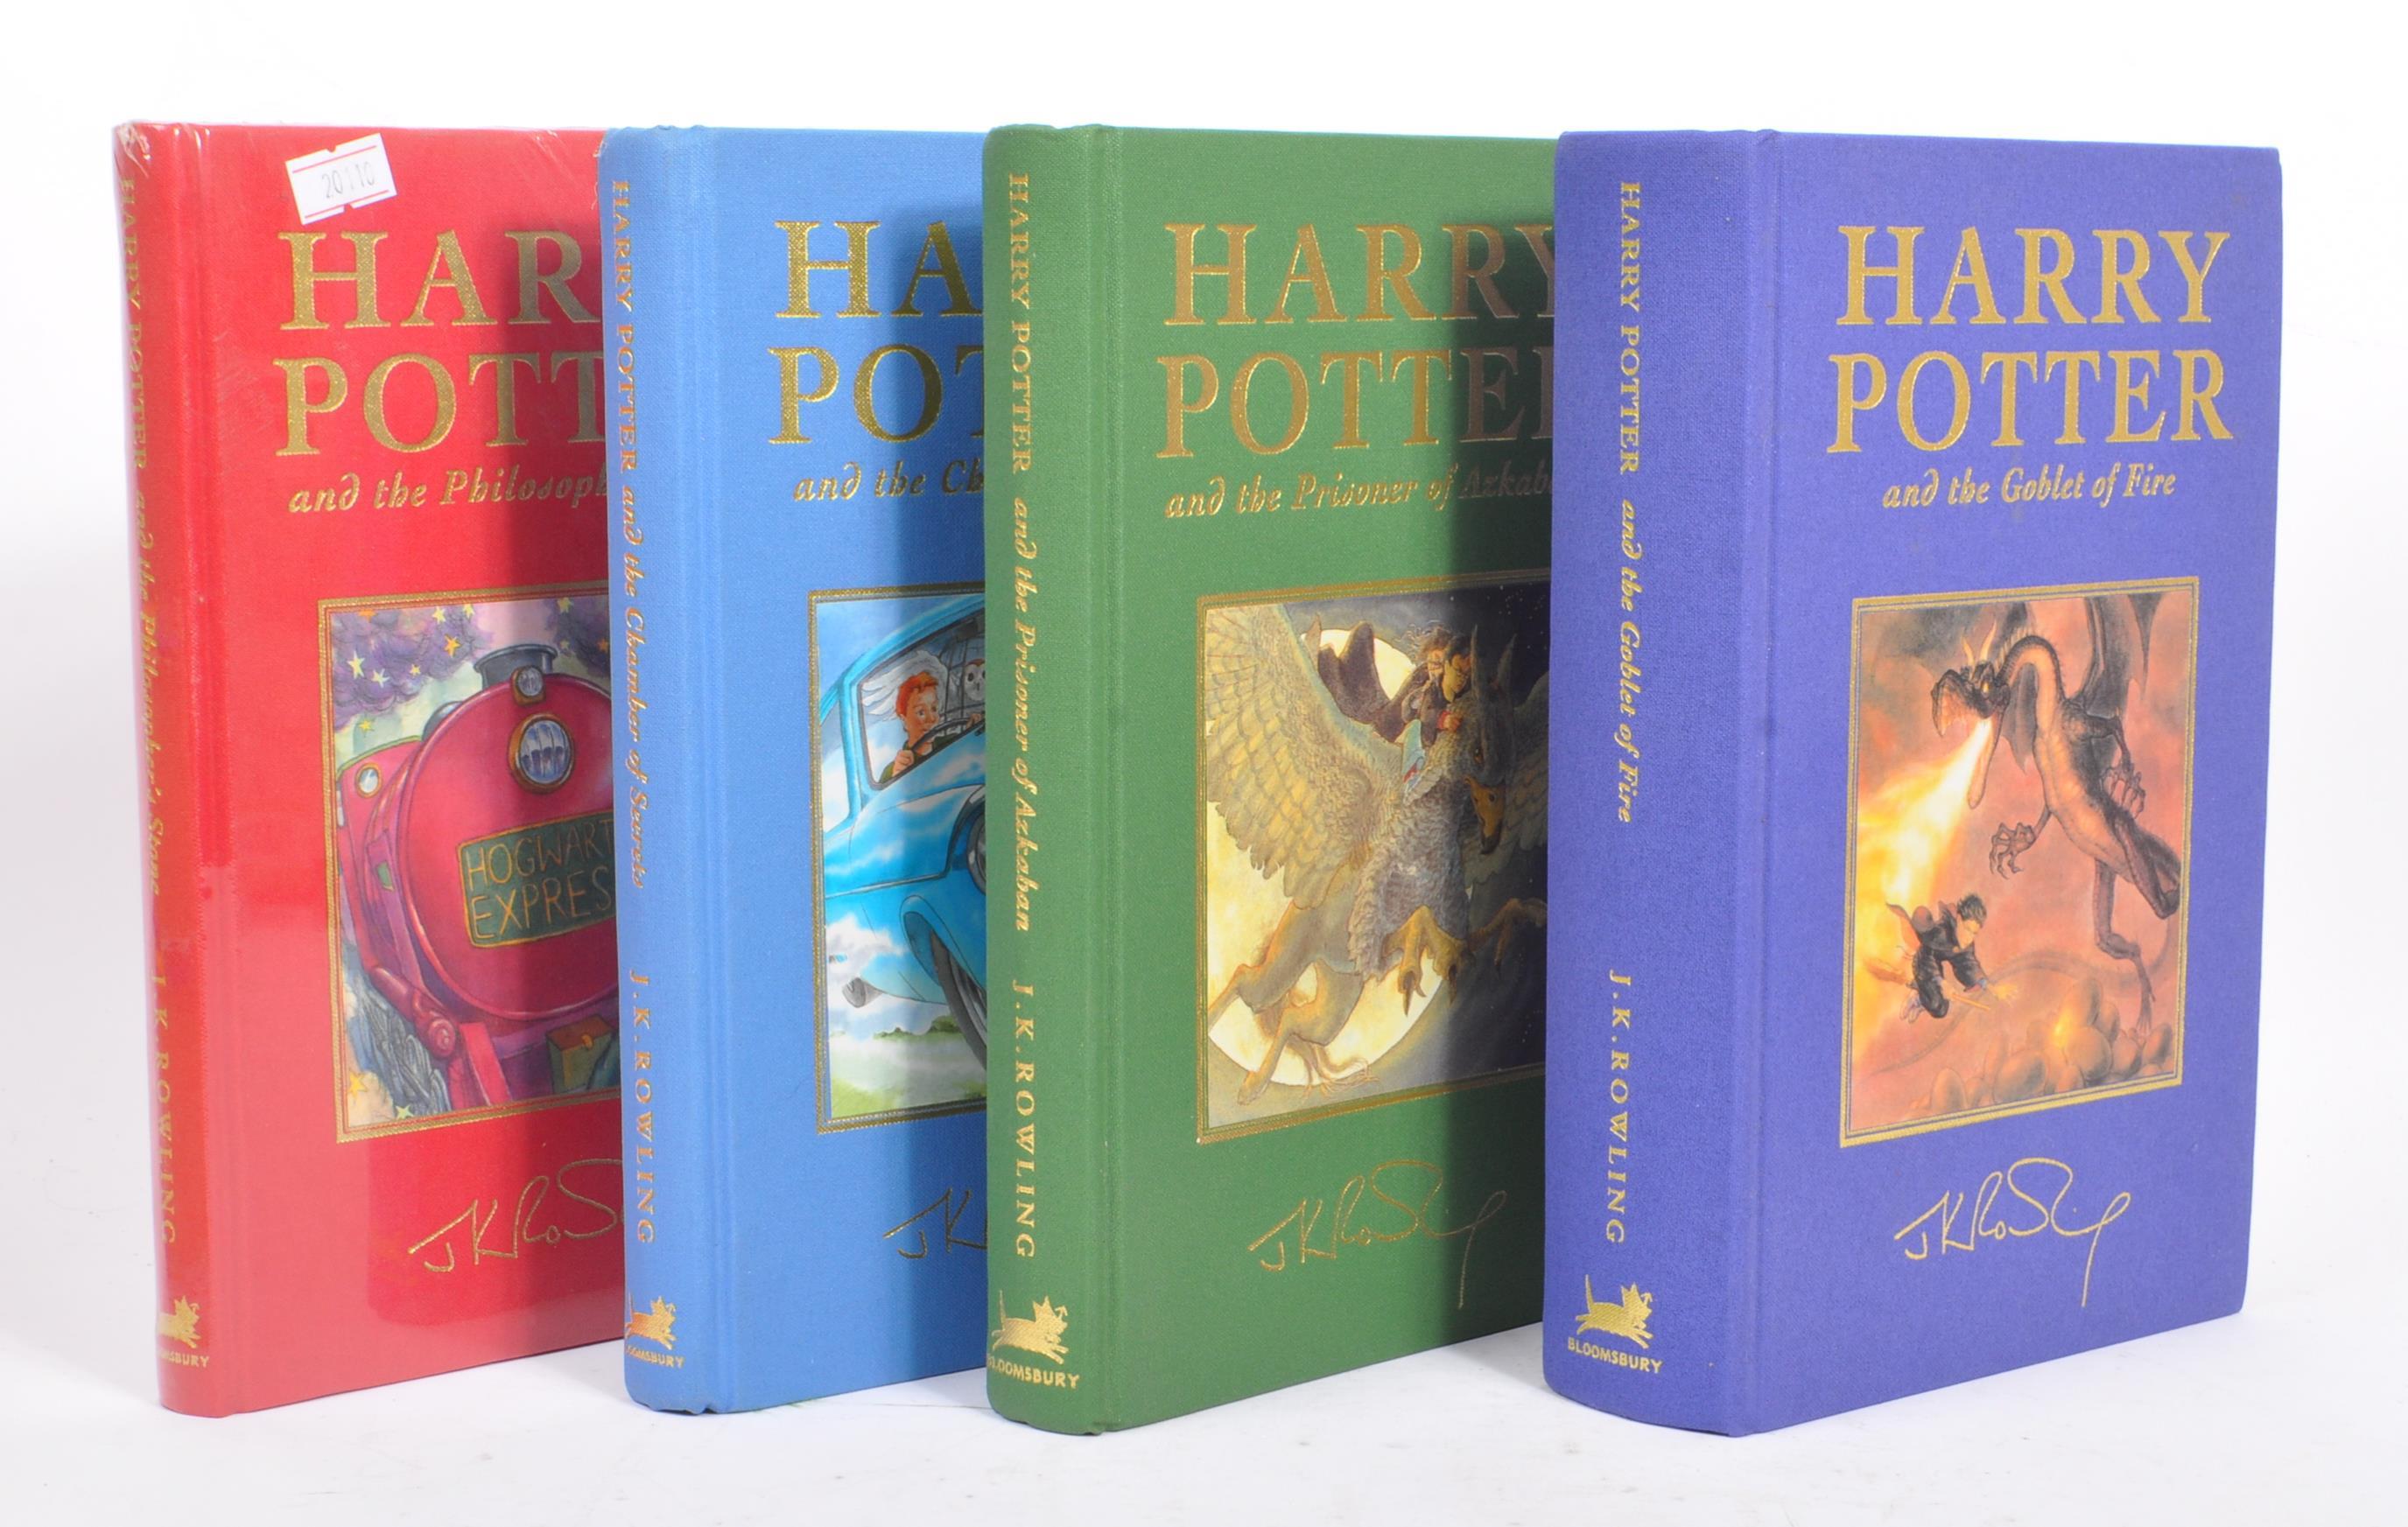 J. K. ROWLING - COLLECTION OF HARRY POTTER BOOKS - Image 7 of 10